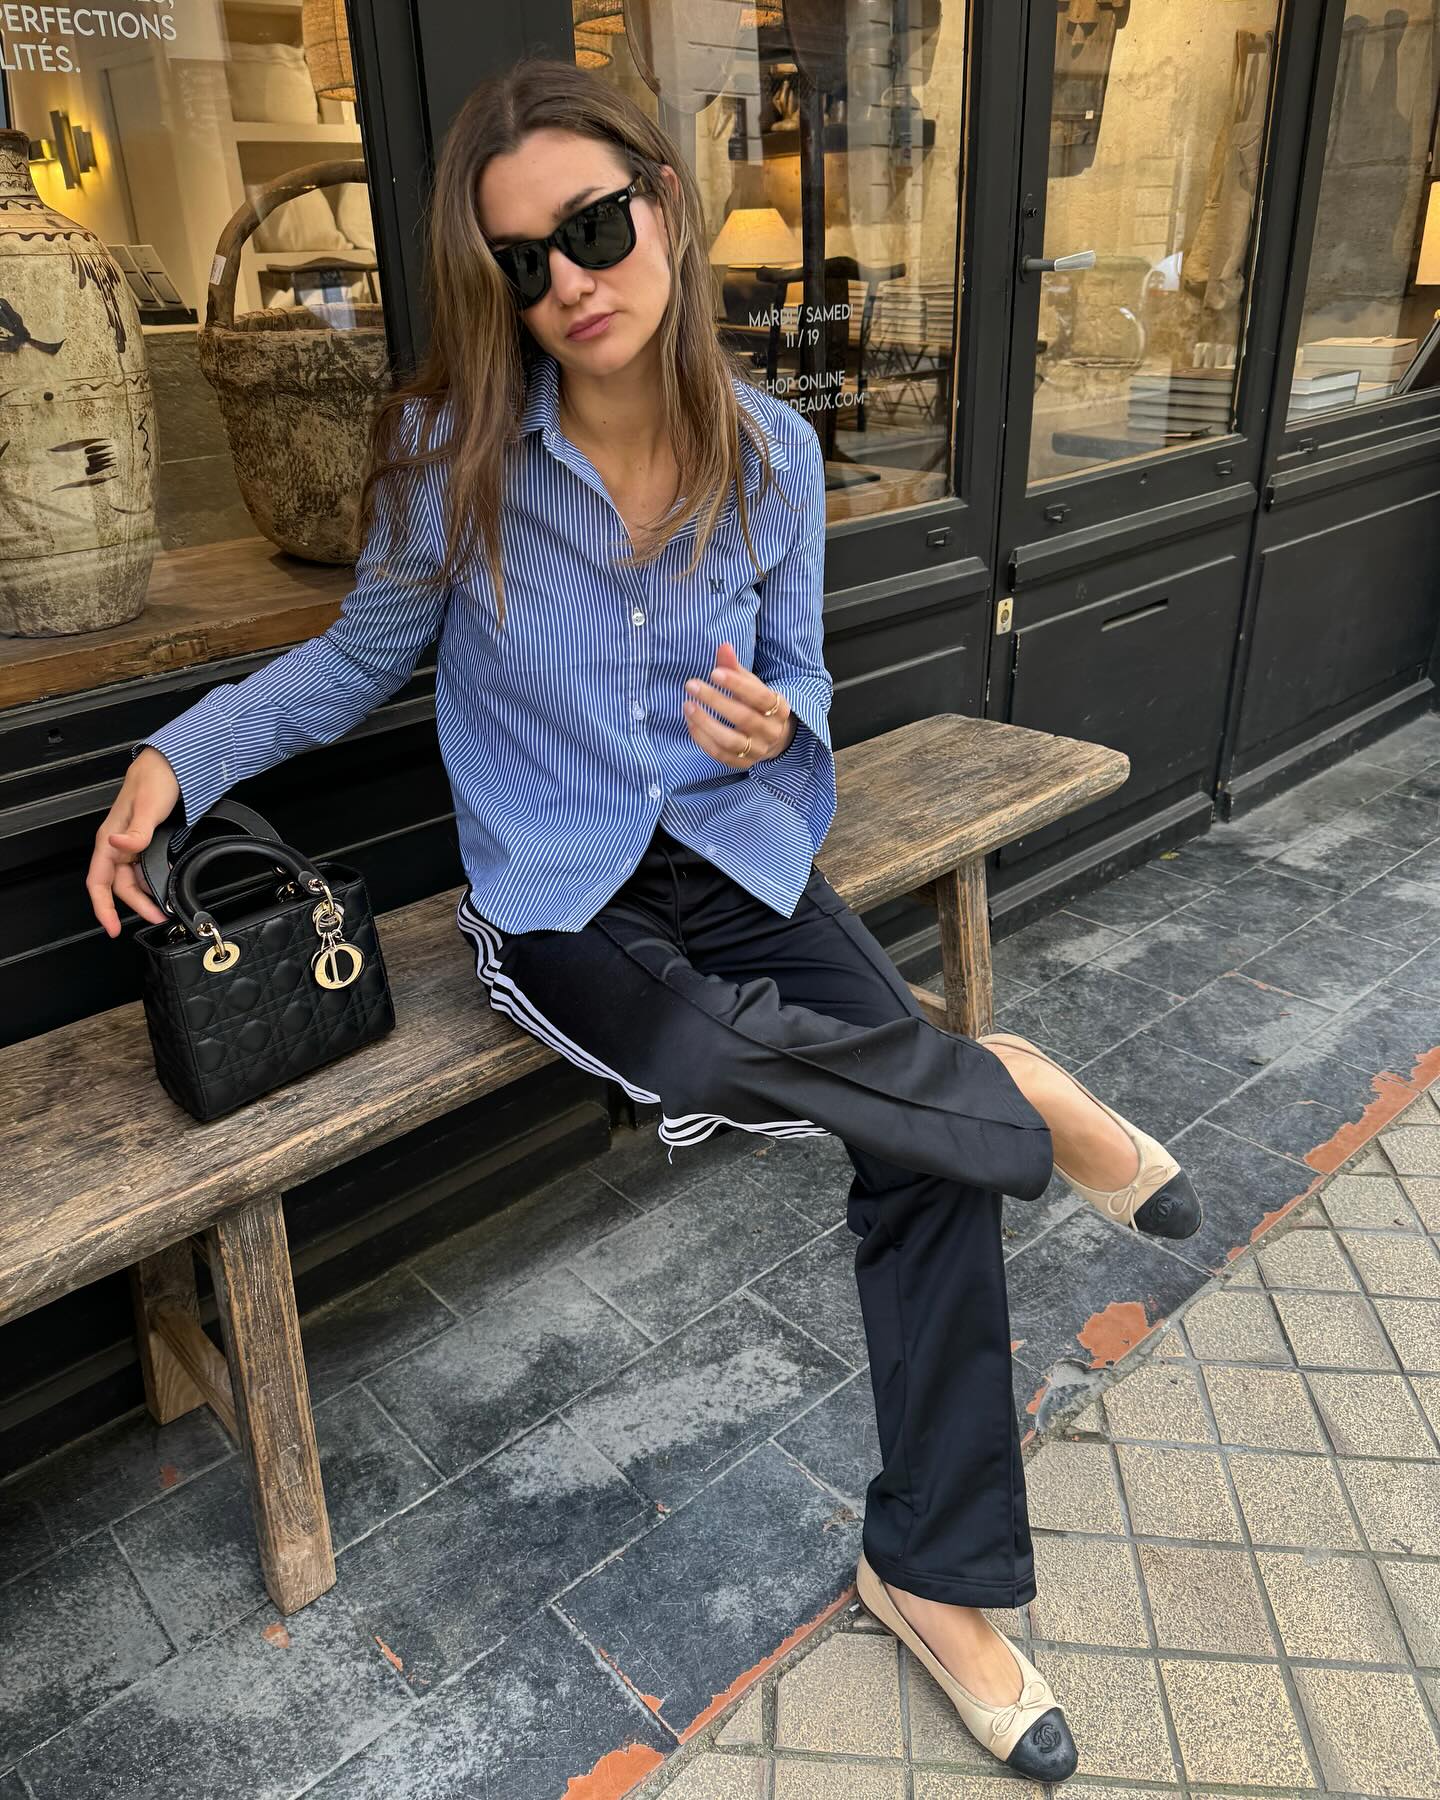 French style influencer sits on a bench outside of a Parisian cafe in a striped blue button-down shirt, Dior bag, Adidas track pants, and Chanel cap-toe ballet flats